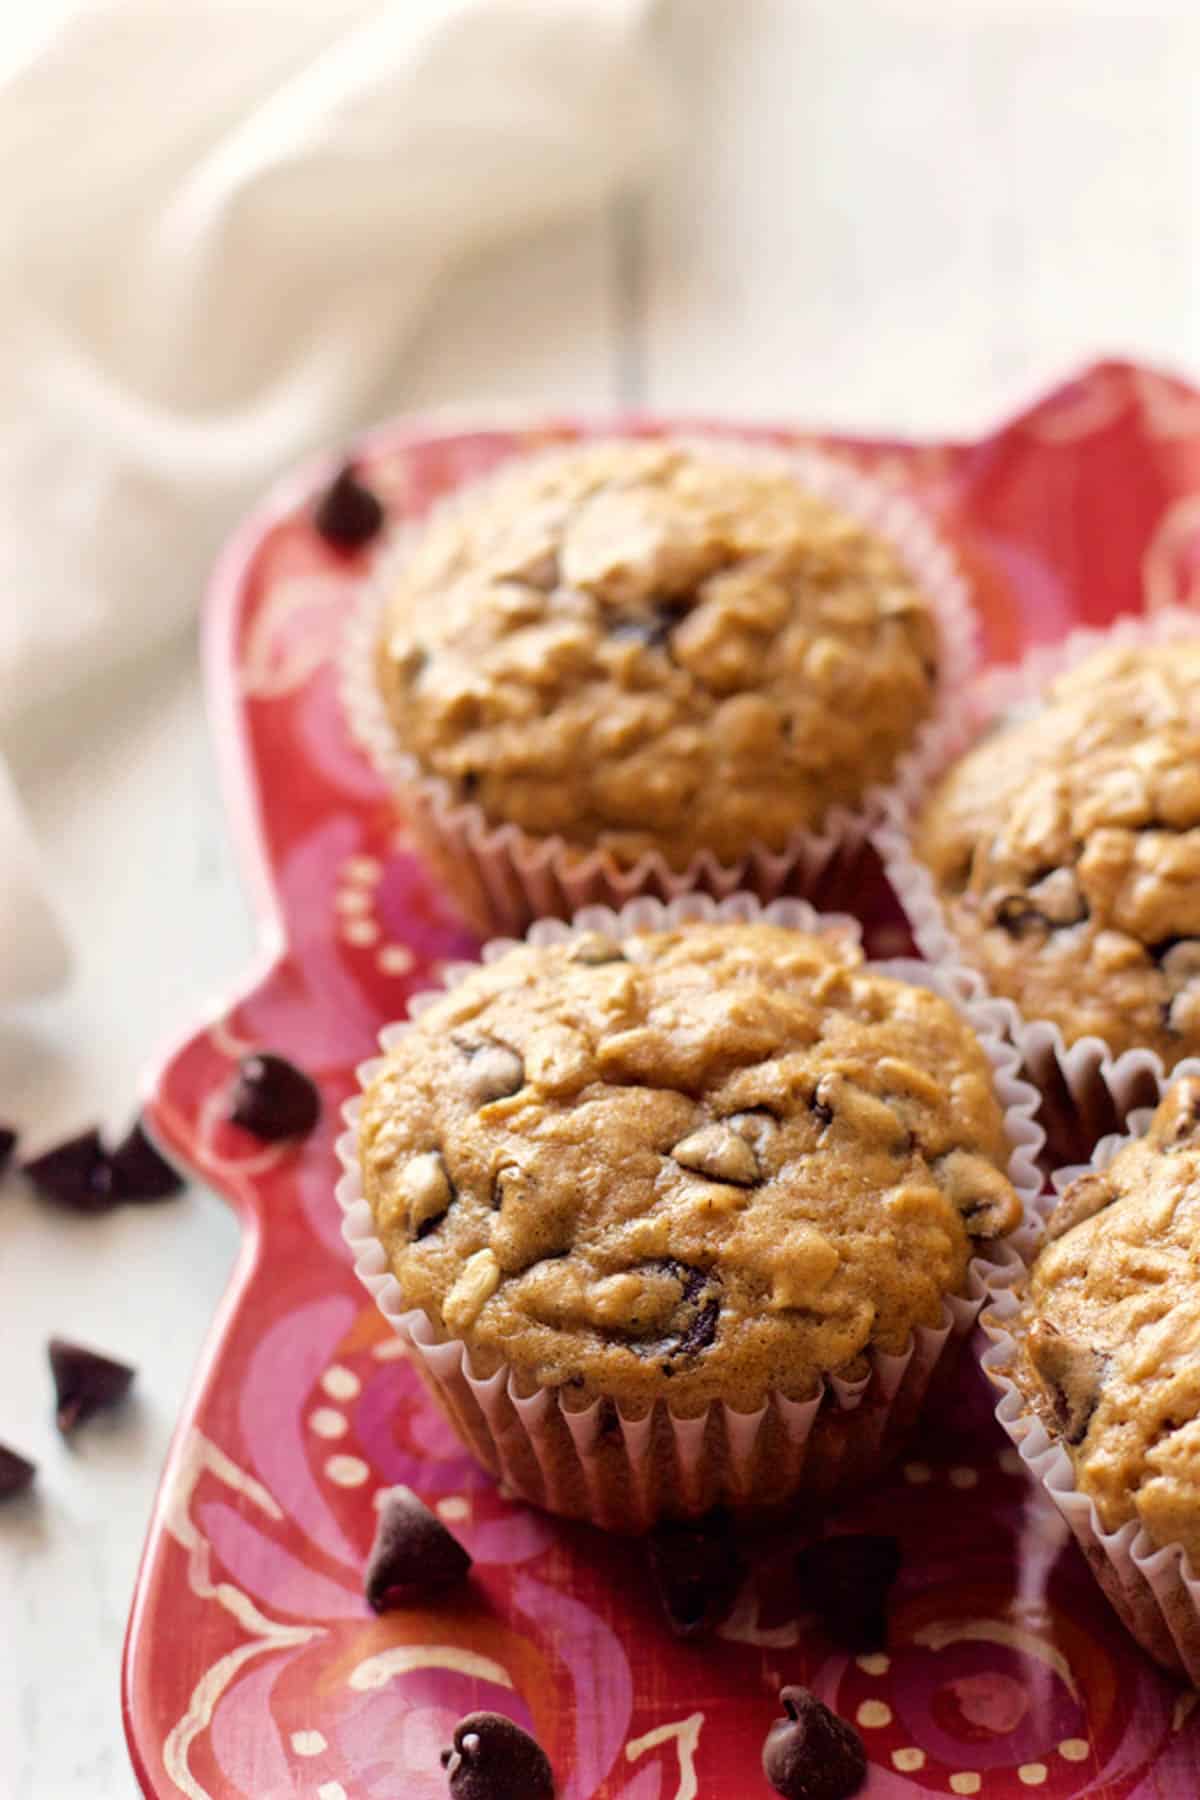 Healthy chocolate chip muffins on a red plate with chocolate chips scattered nearby.